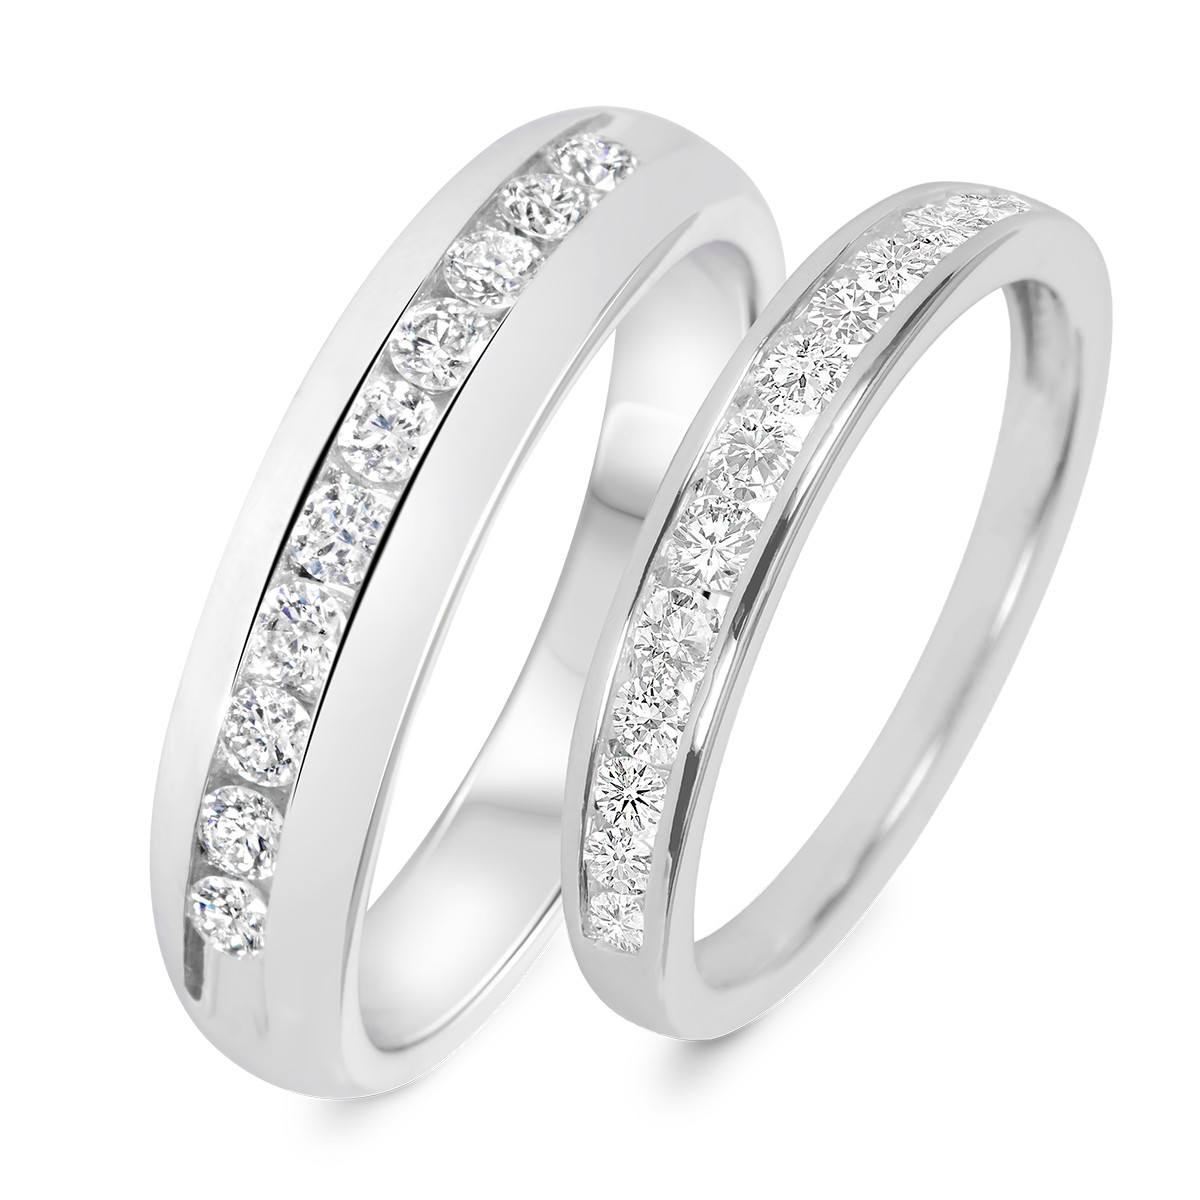 Wedding Band Sets His And Hers
 7 8 Carat T W Diamond His And Hers Wedding Band Set 14K